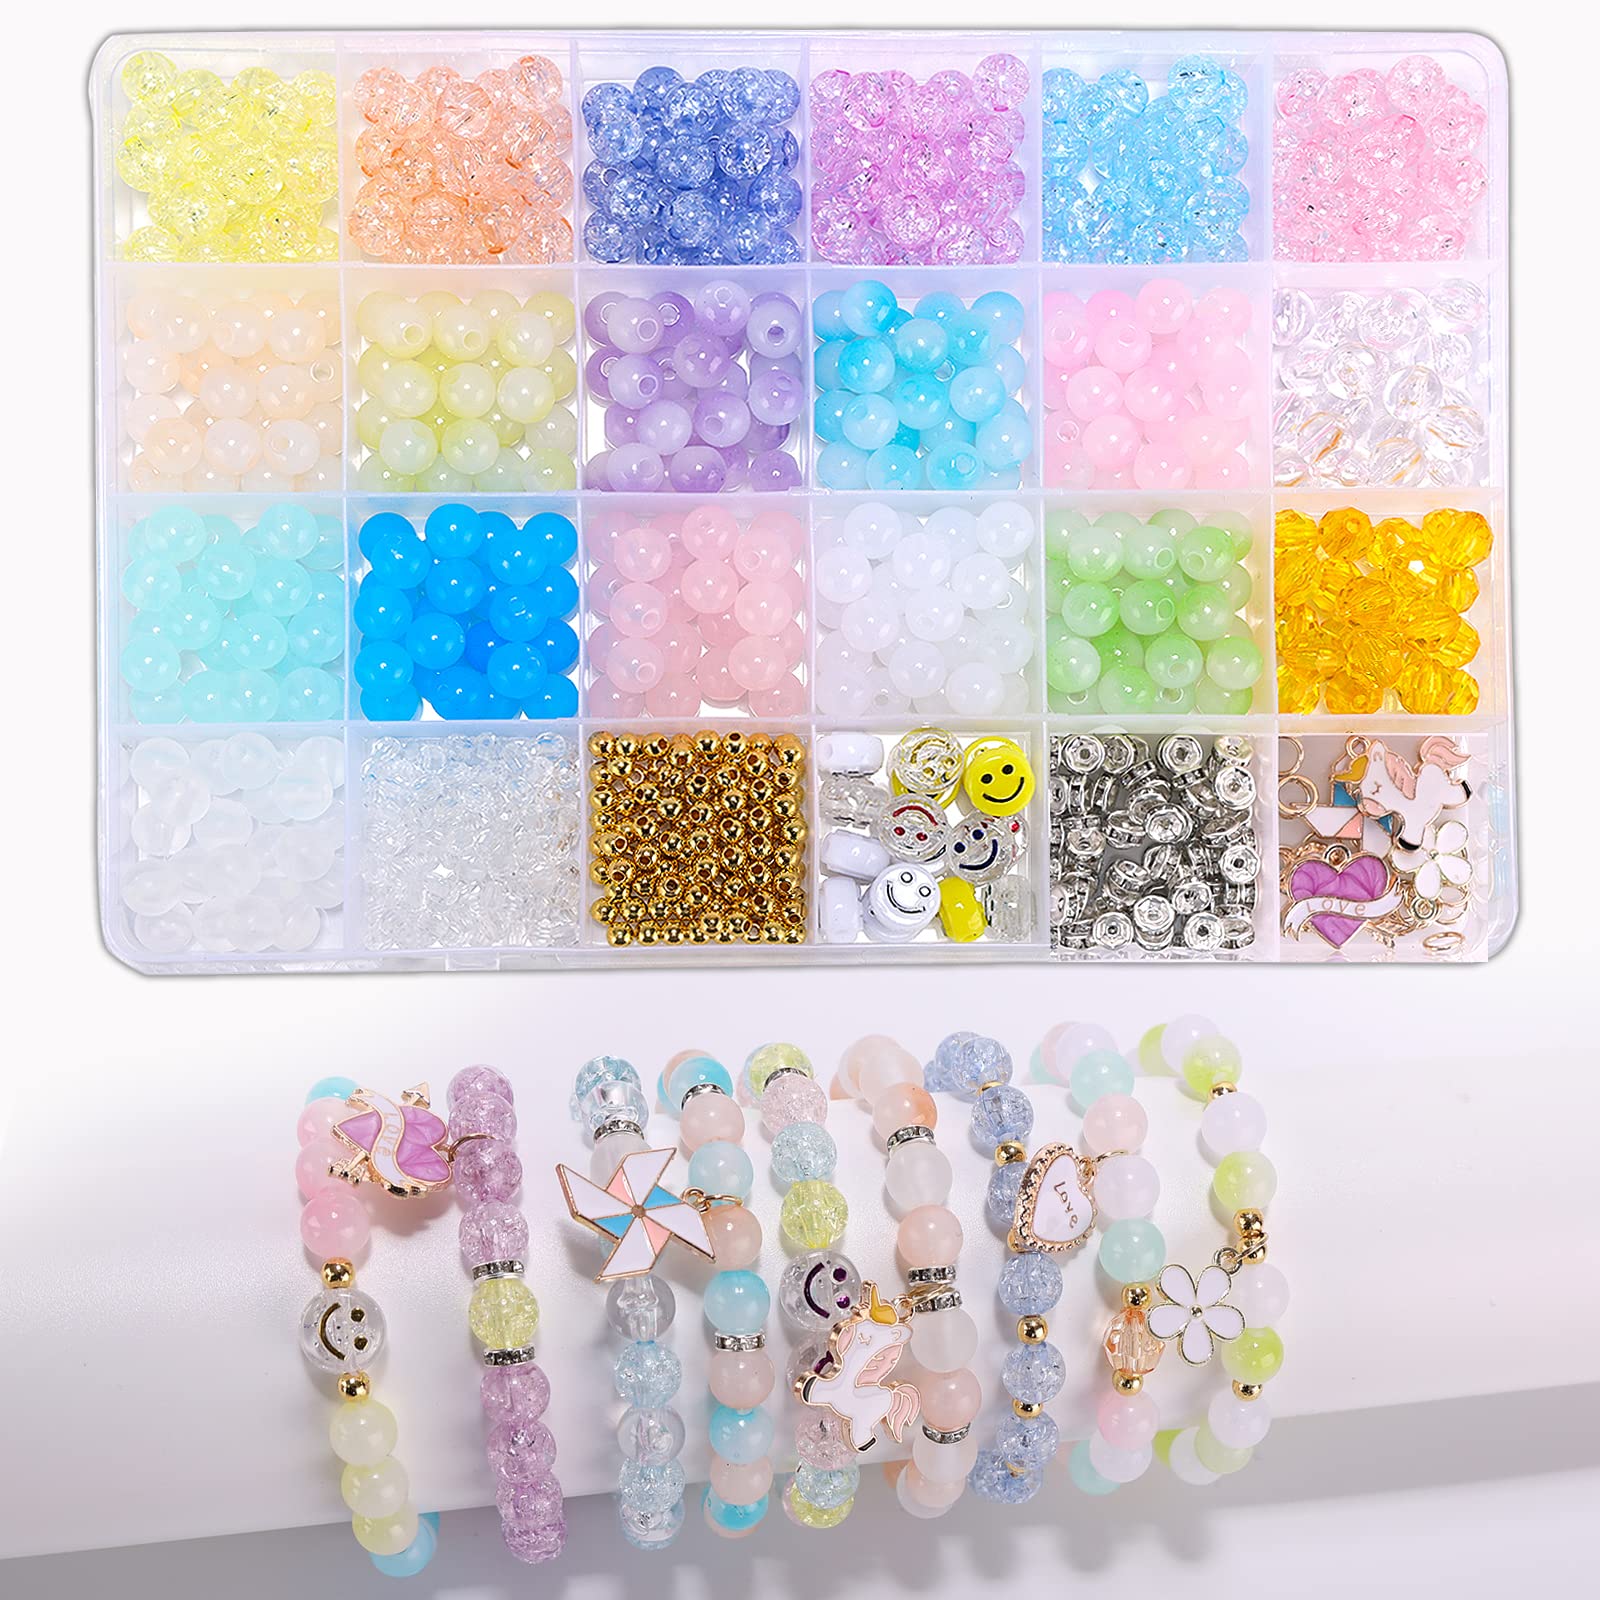 Clear Color Glass Beads Bracelet Making Kit with Eyes, Girls